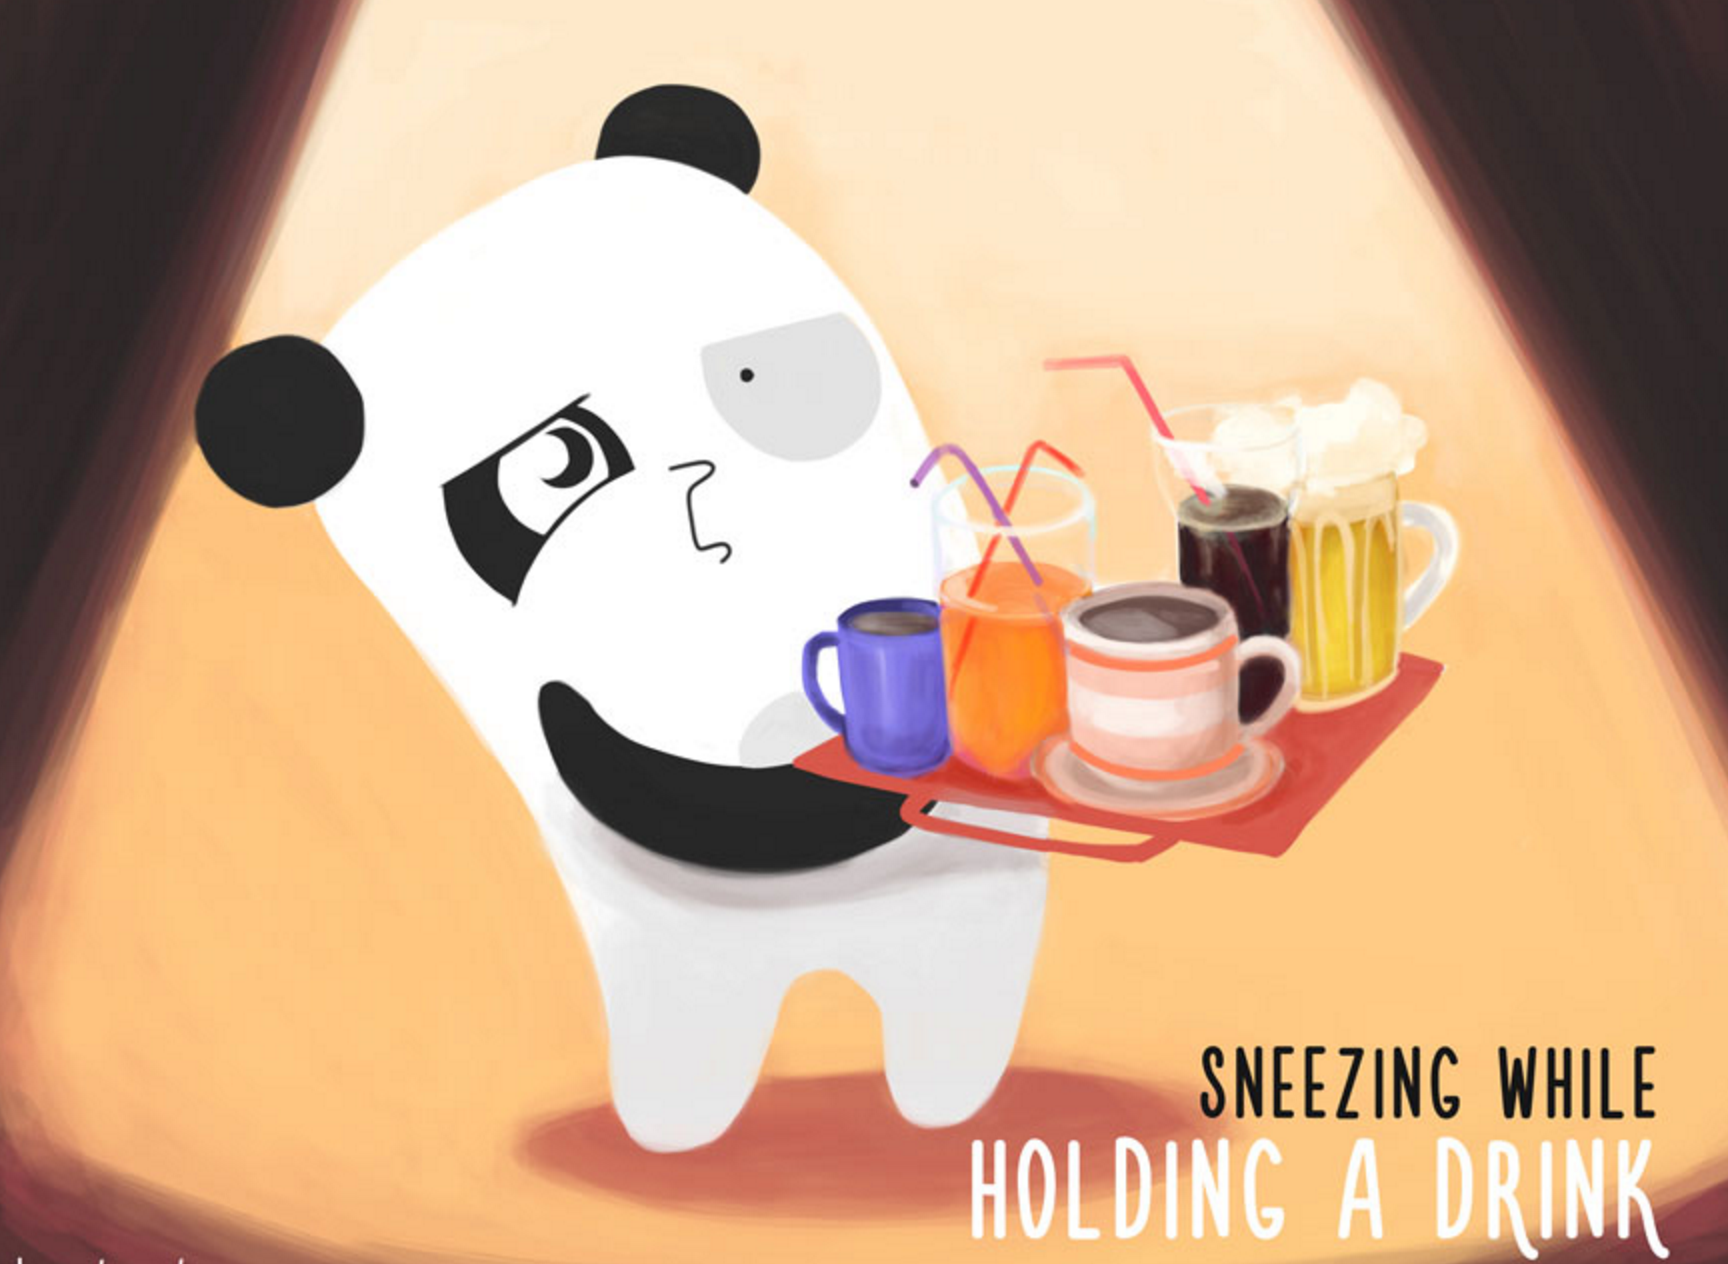 25 annoying little things - Sneezing While Holding A Drink